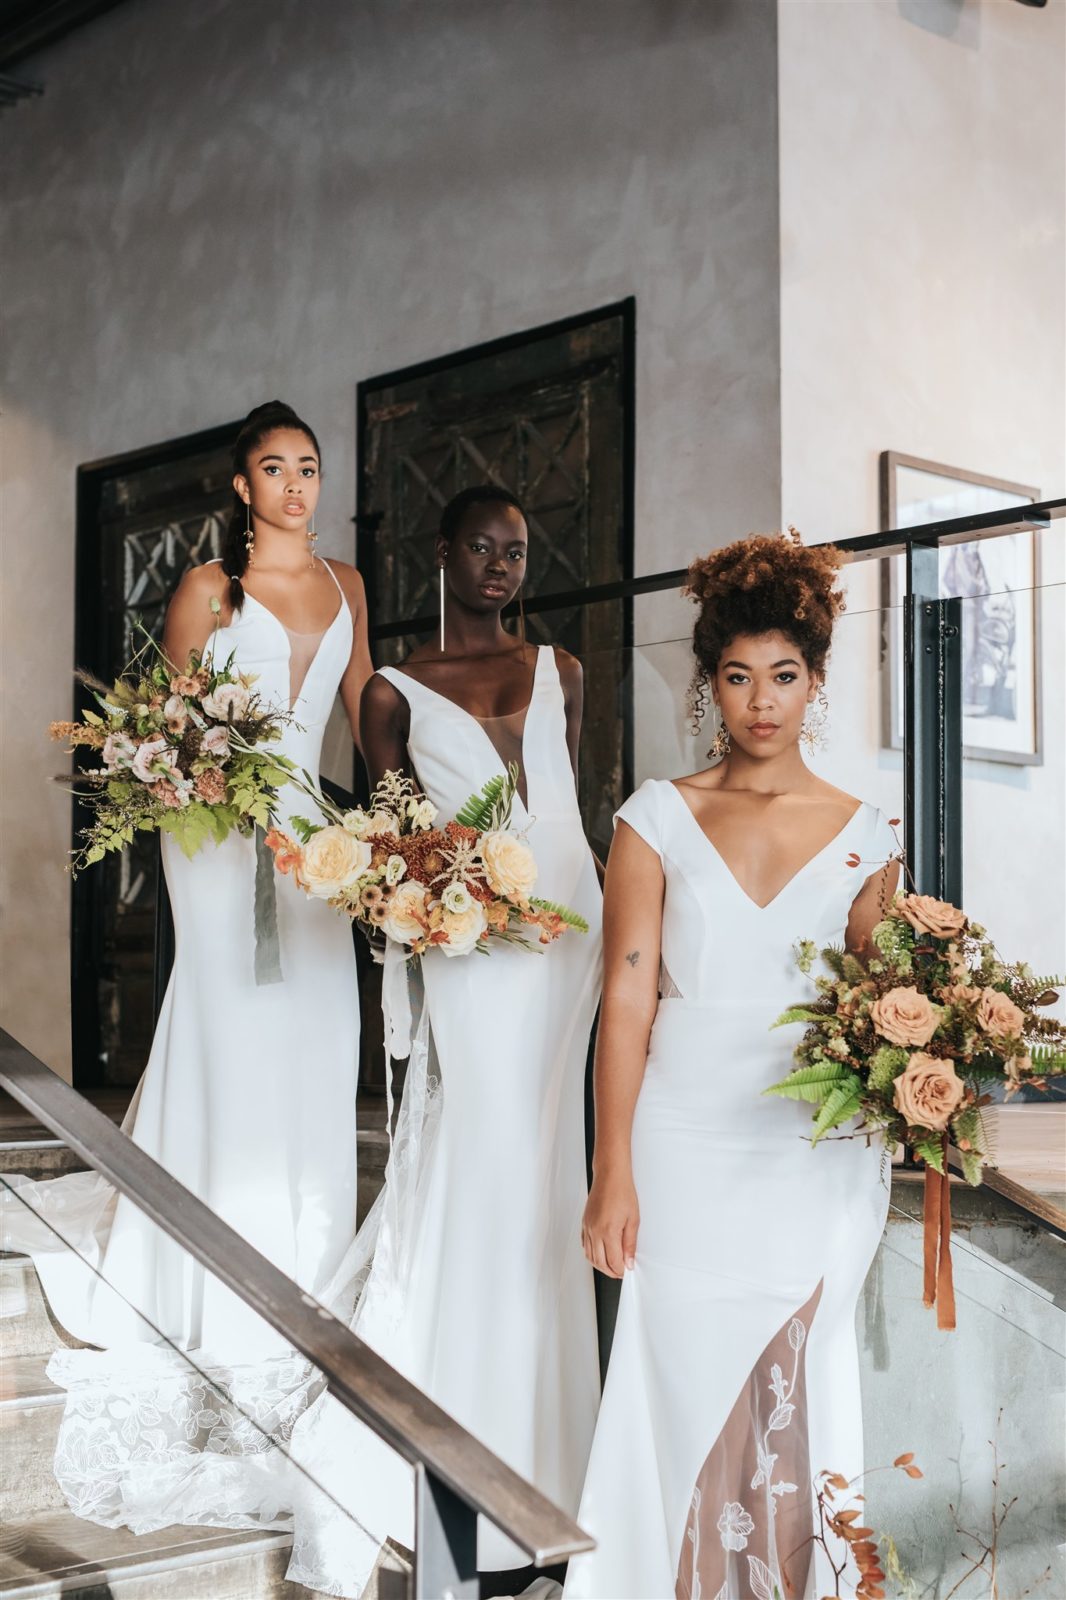 Chic bridal inspiration featuring Anais Anette gowns at Bridgette Bar in Calgary Alberta